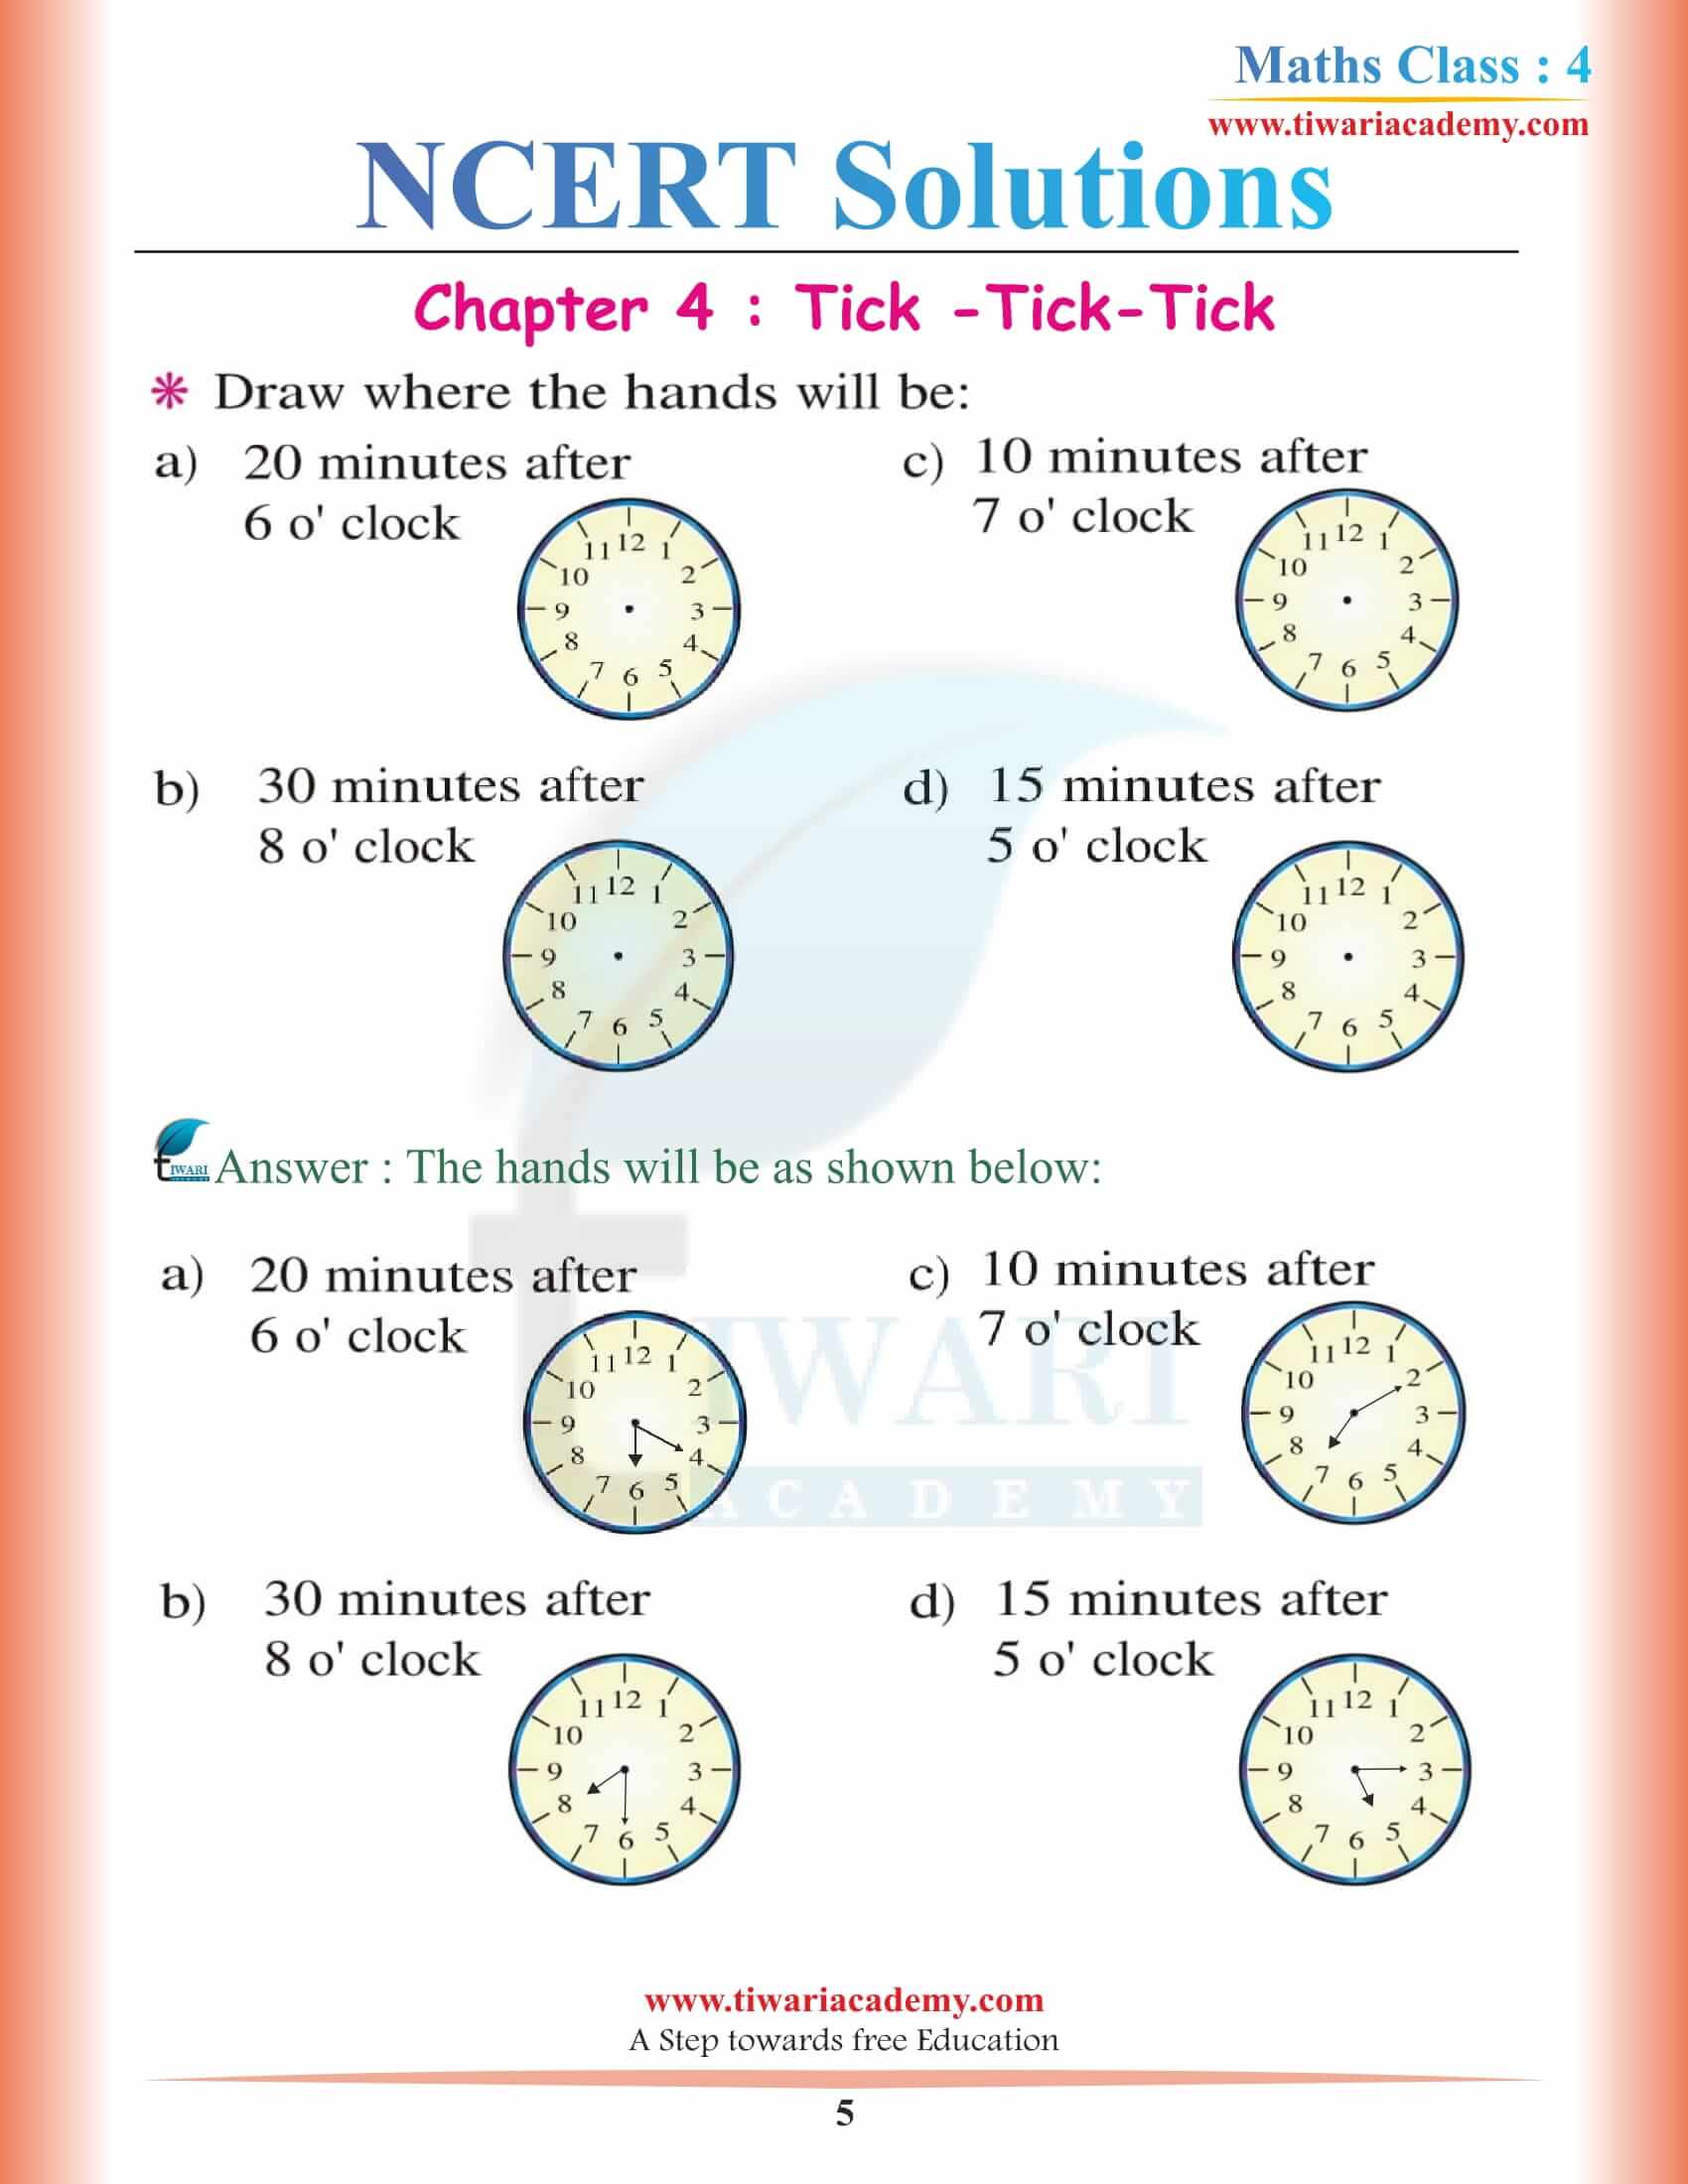 NCERT Solutions for Class 4 Maths Chapter 4 free download